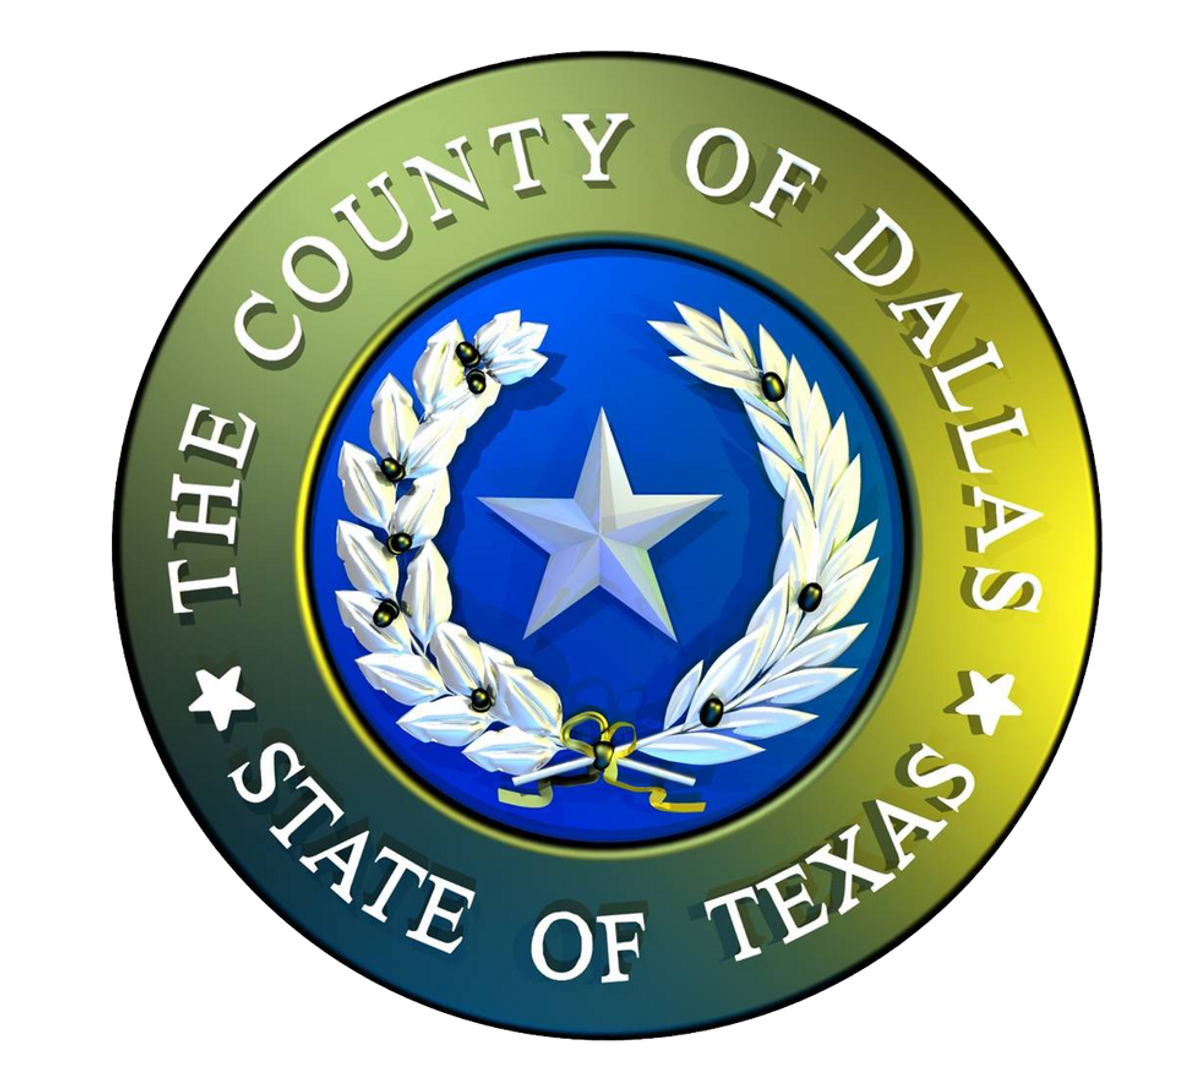 Dallas County Medical Examiner Illegally Held Appointments